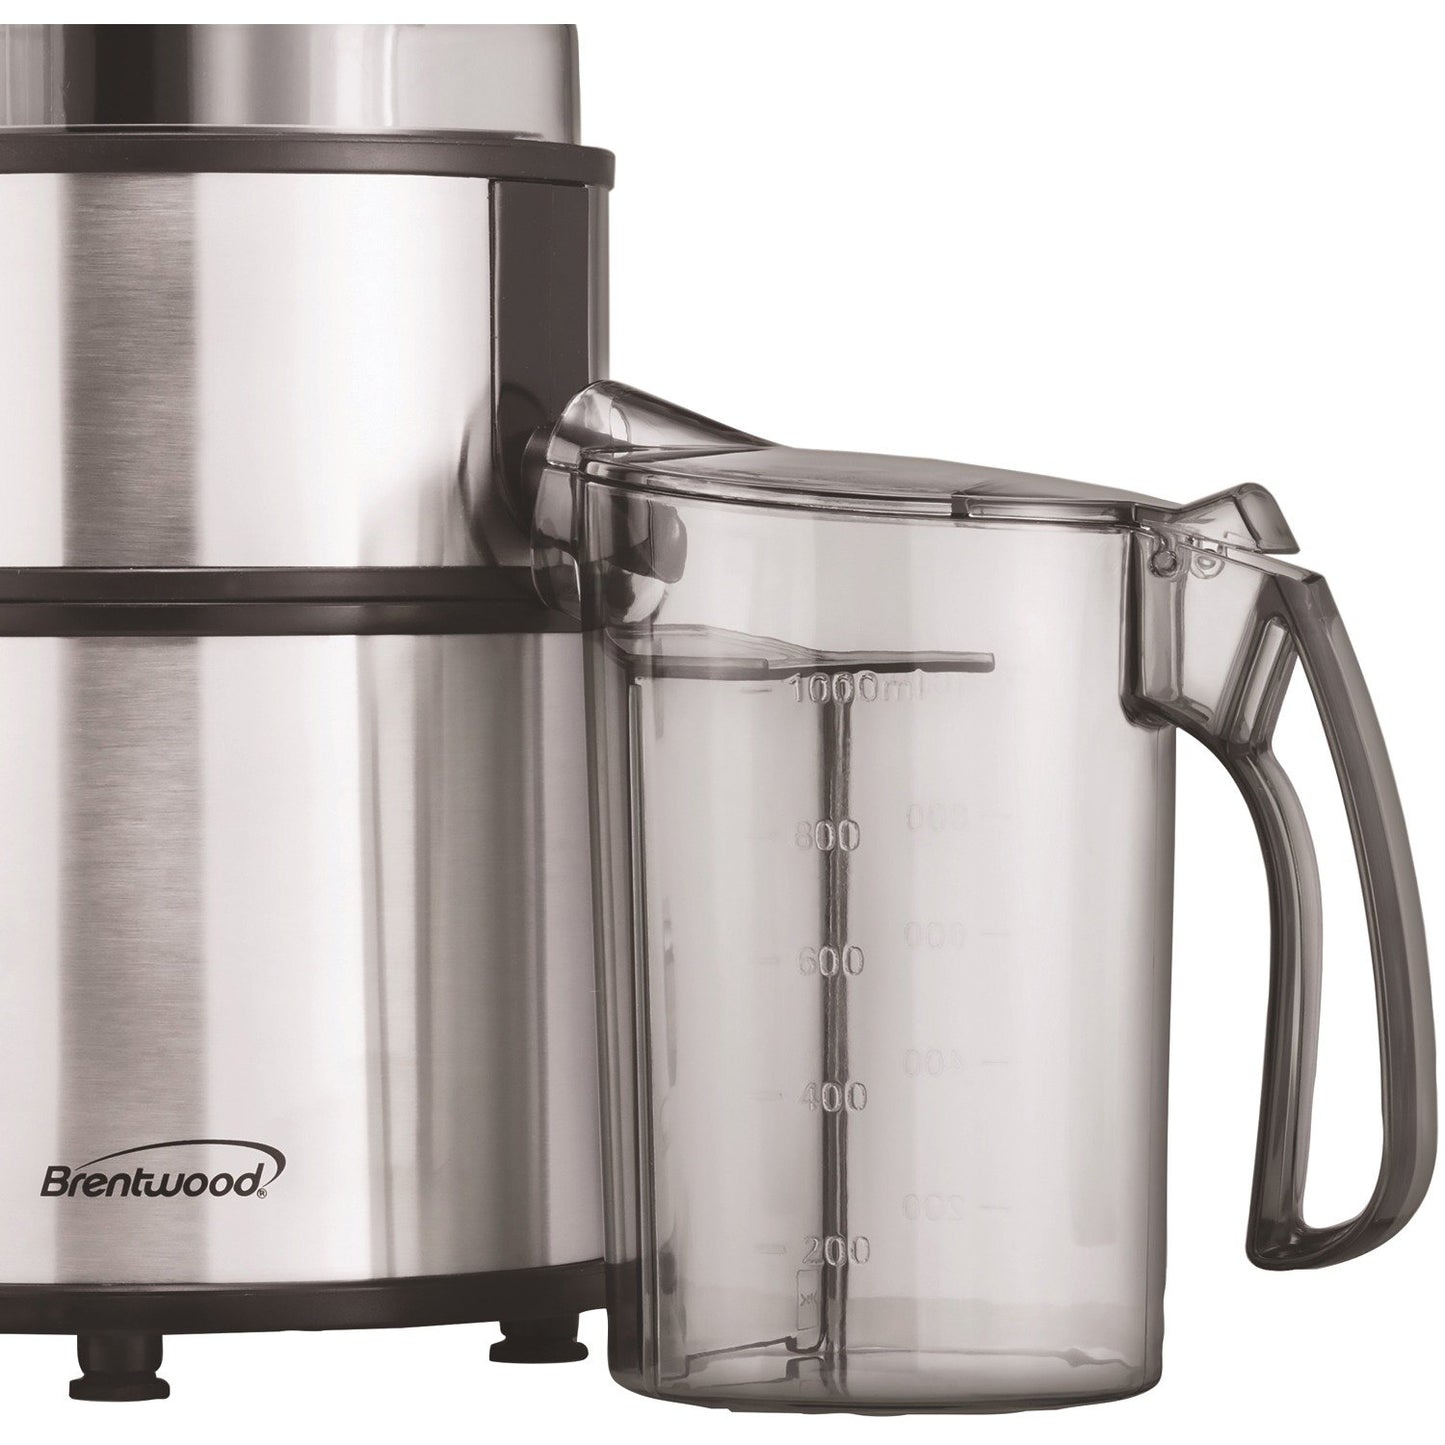 BRENTWOOD JC-500 800W Stainless Steel Electric Juice Extractor